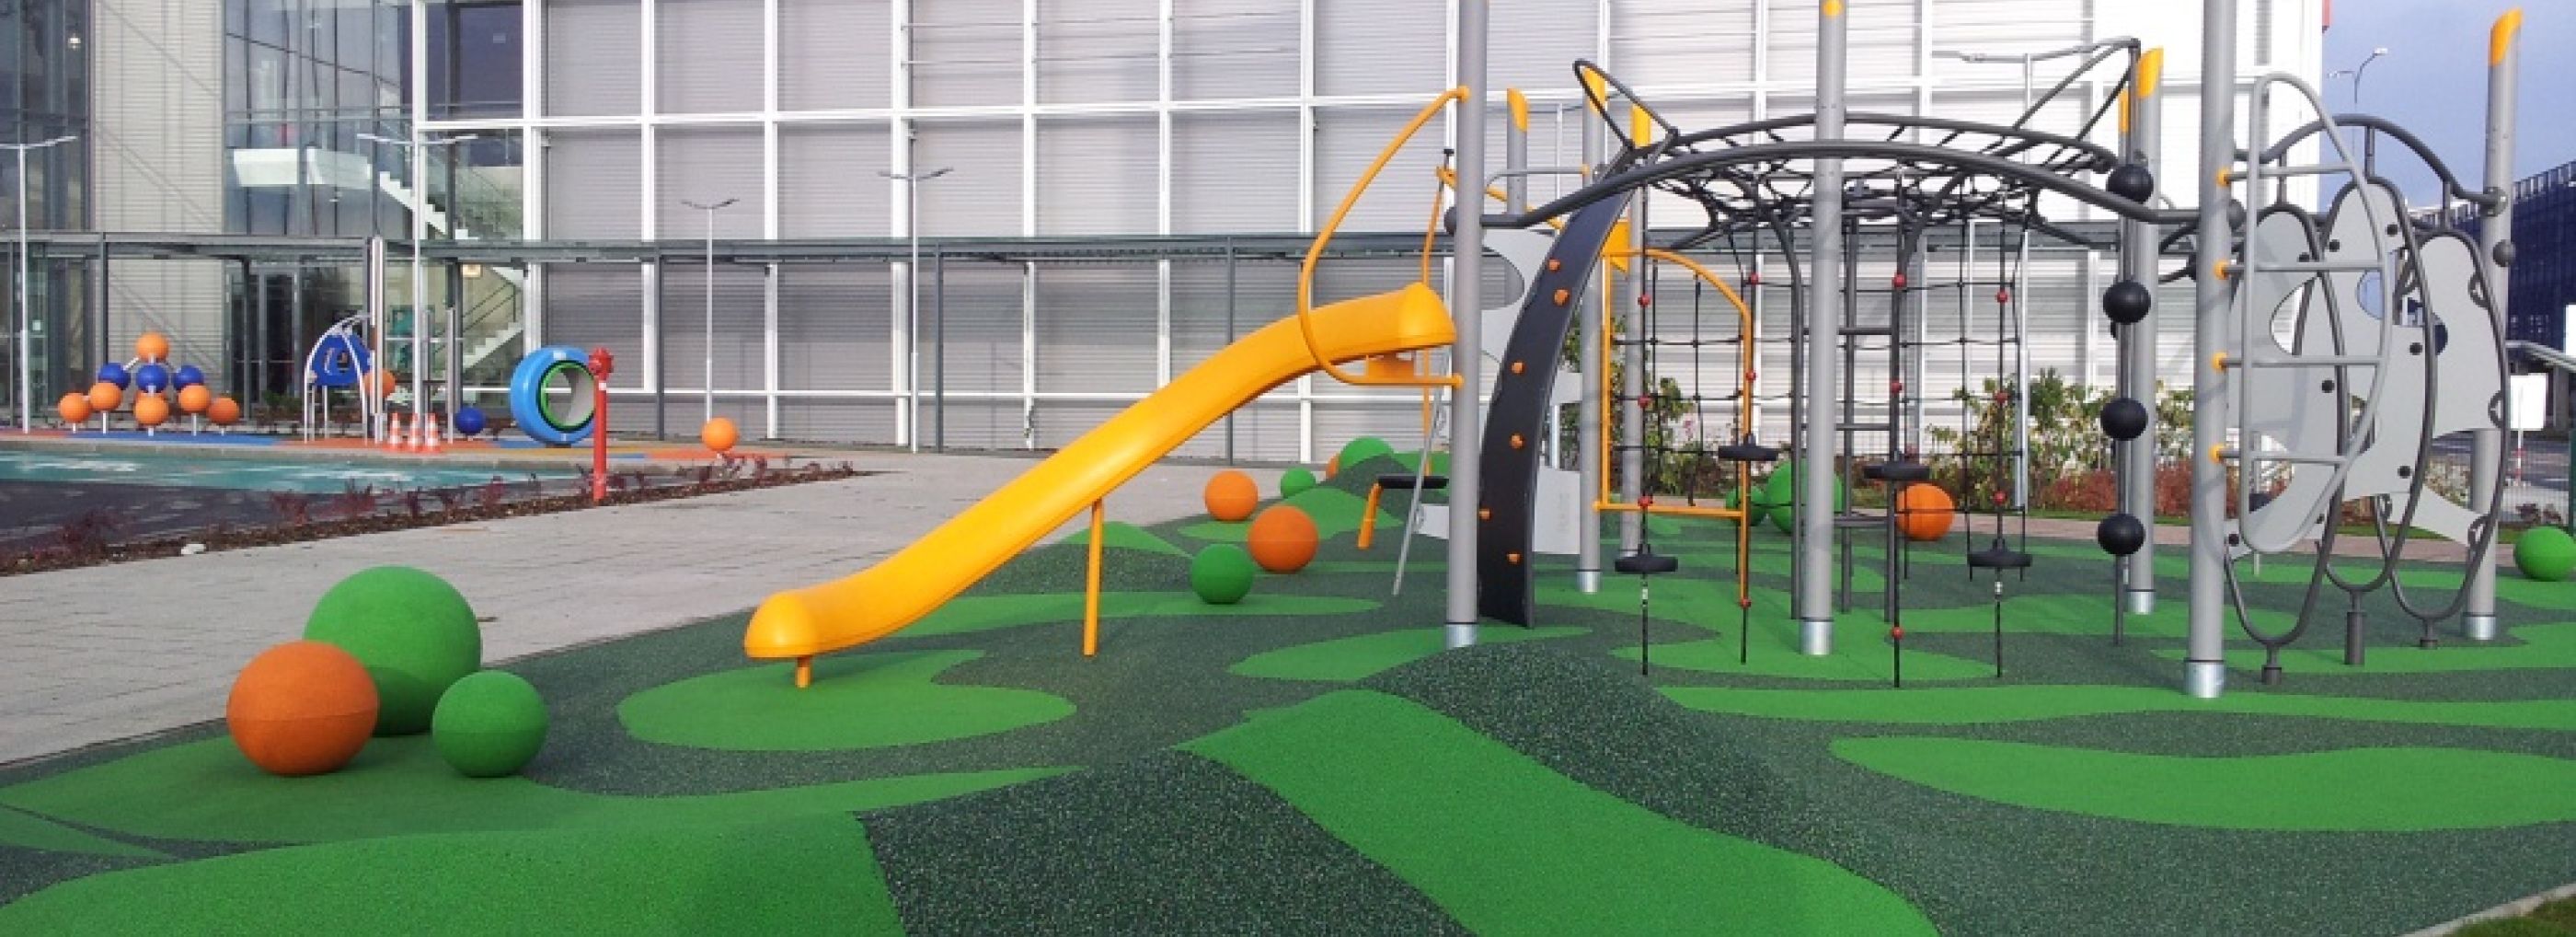 Outdoor climbing frame with green rubber flooring and green & orange spheres.